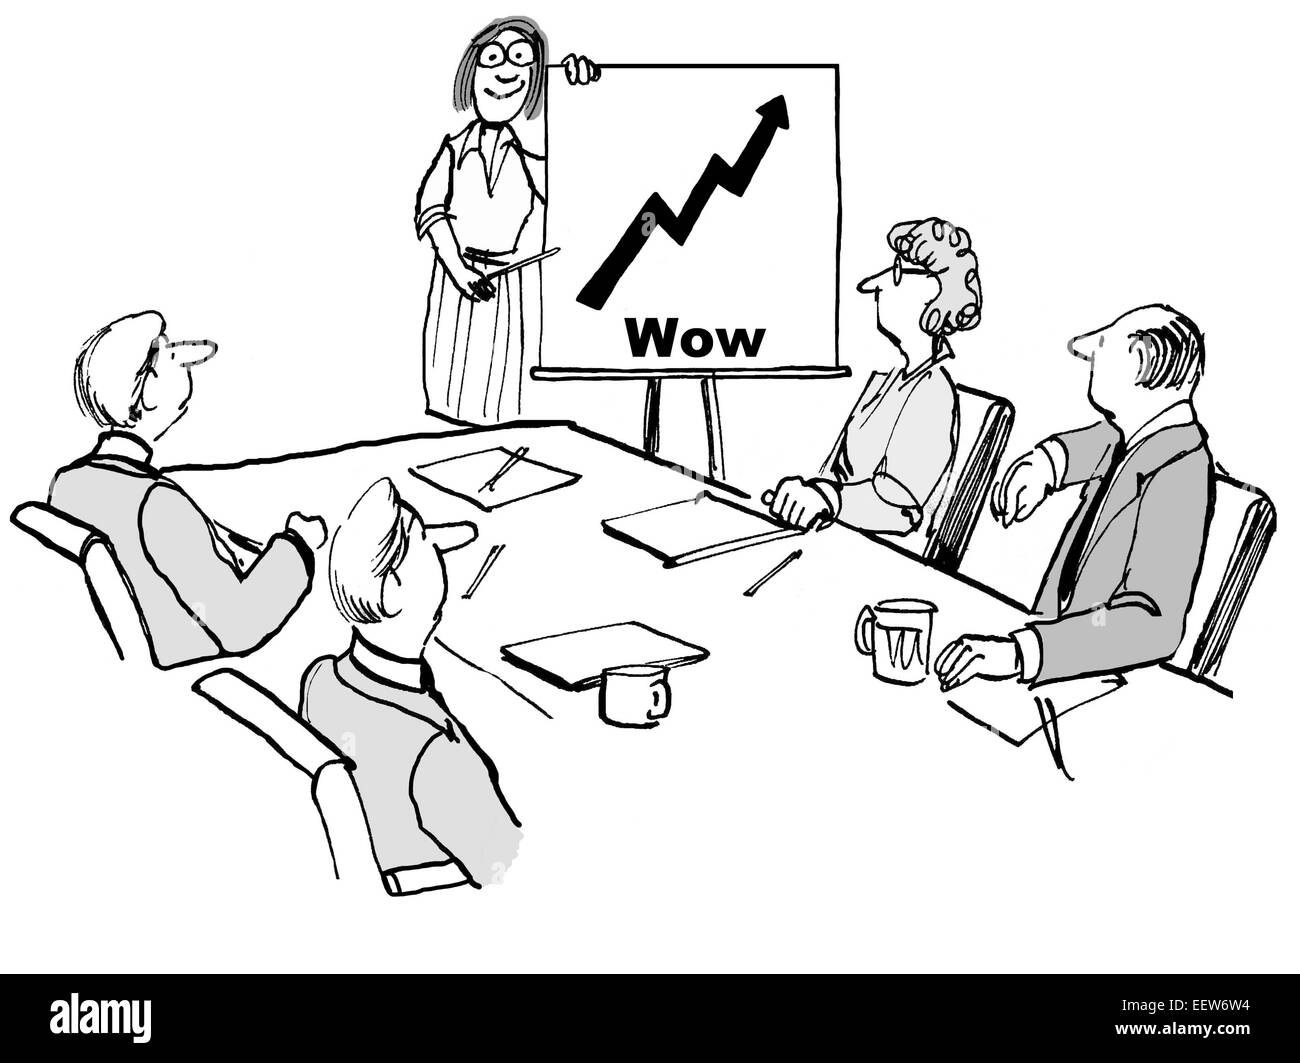 Cartoon of business people in a meeting.  Chart showing sales growth and the word Wow. Stock Photo